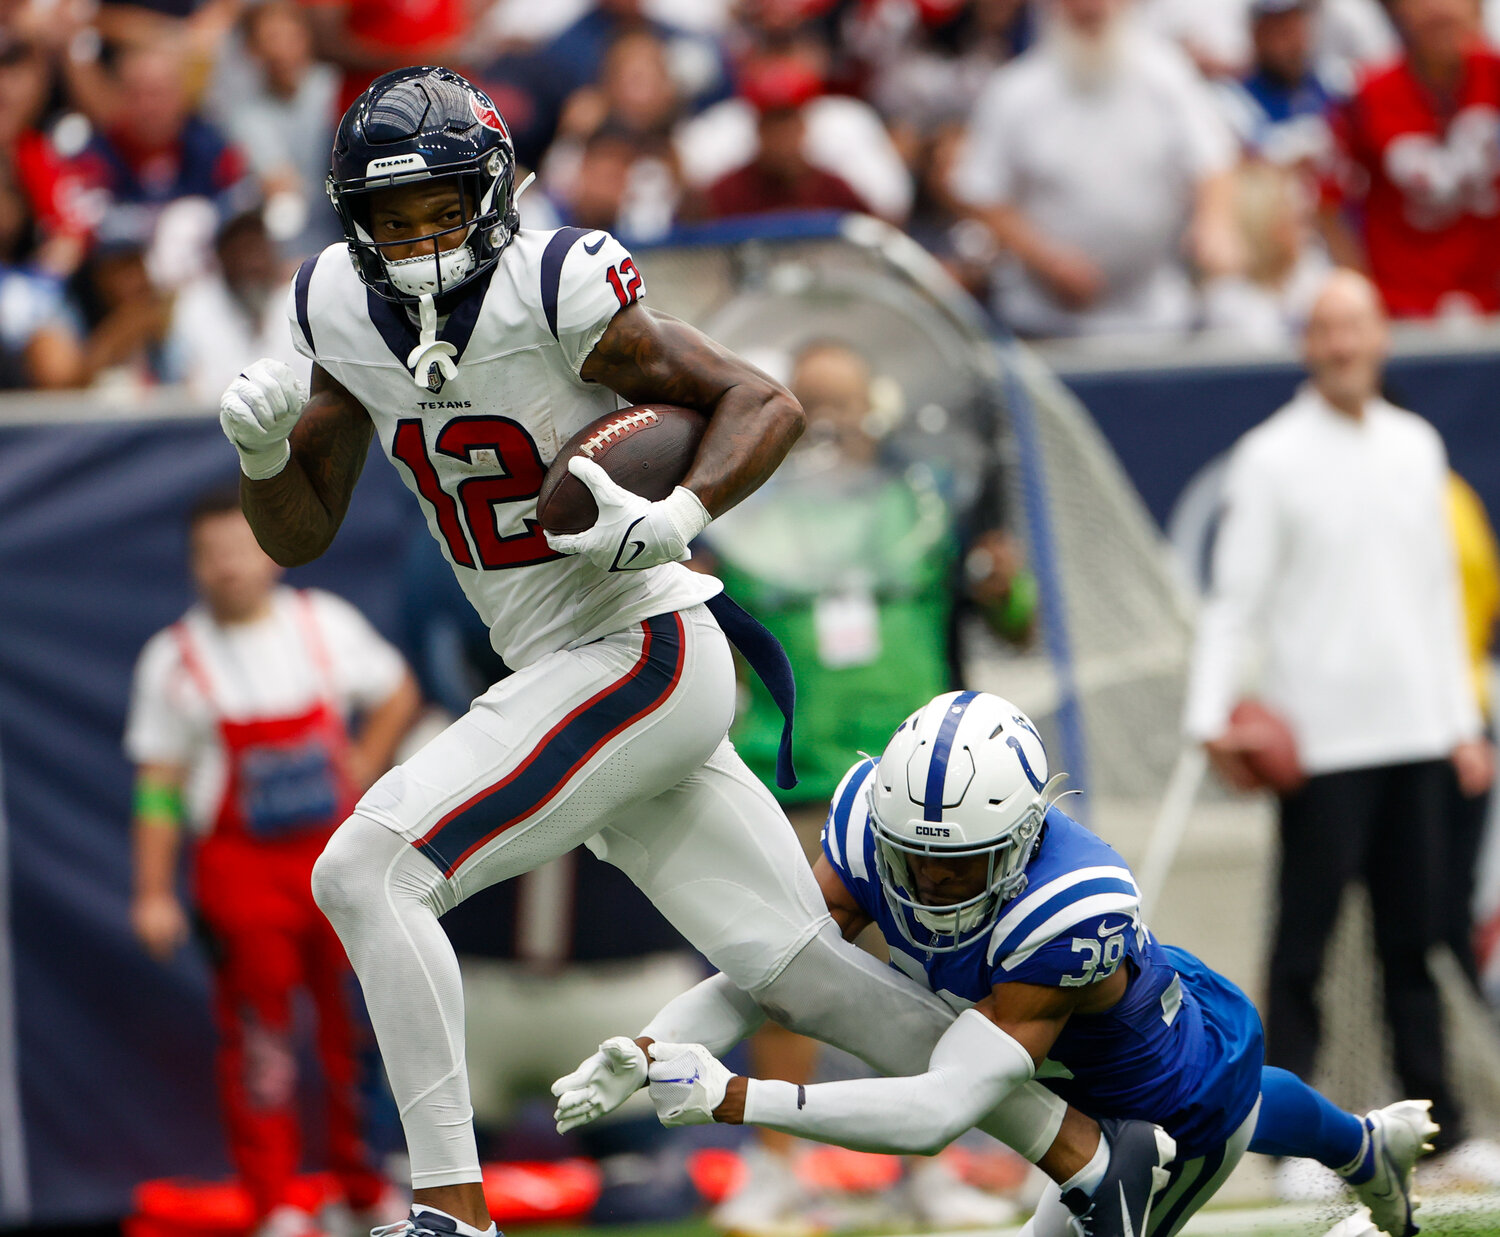 Texans wide receiver Nico Collins (12) runs through the tackle attempt of Colts cornerback Darrell Baker Jr. (39) during an NFL game between the Texans and the Colts on September 17, 2023 in Houston. The Colts won, 31-20.